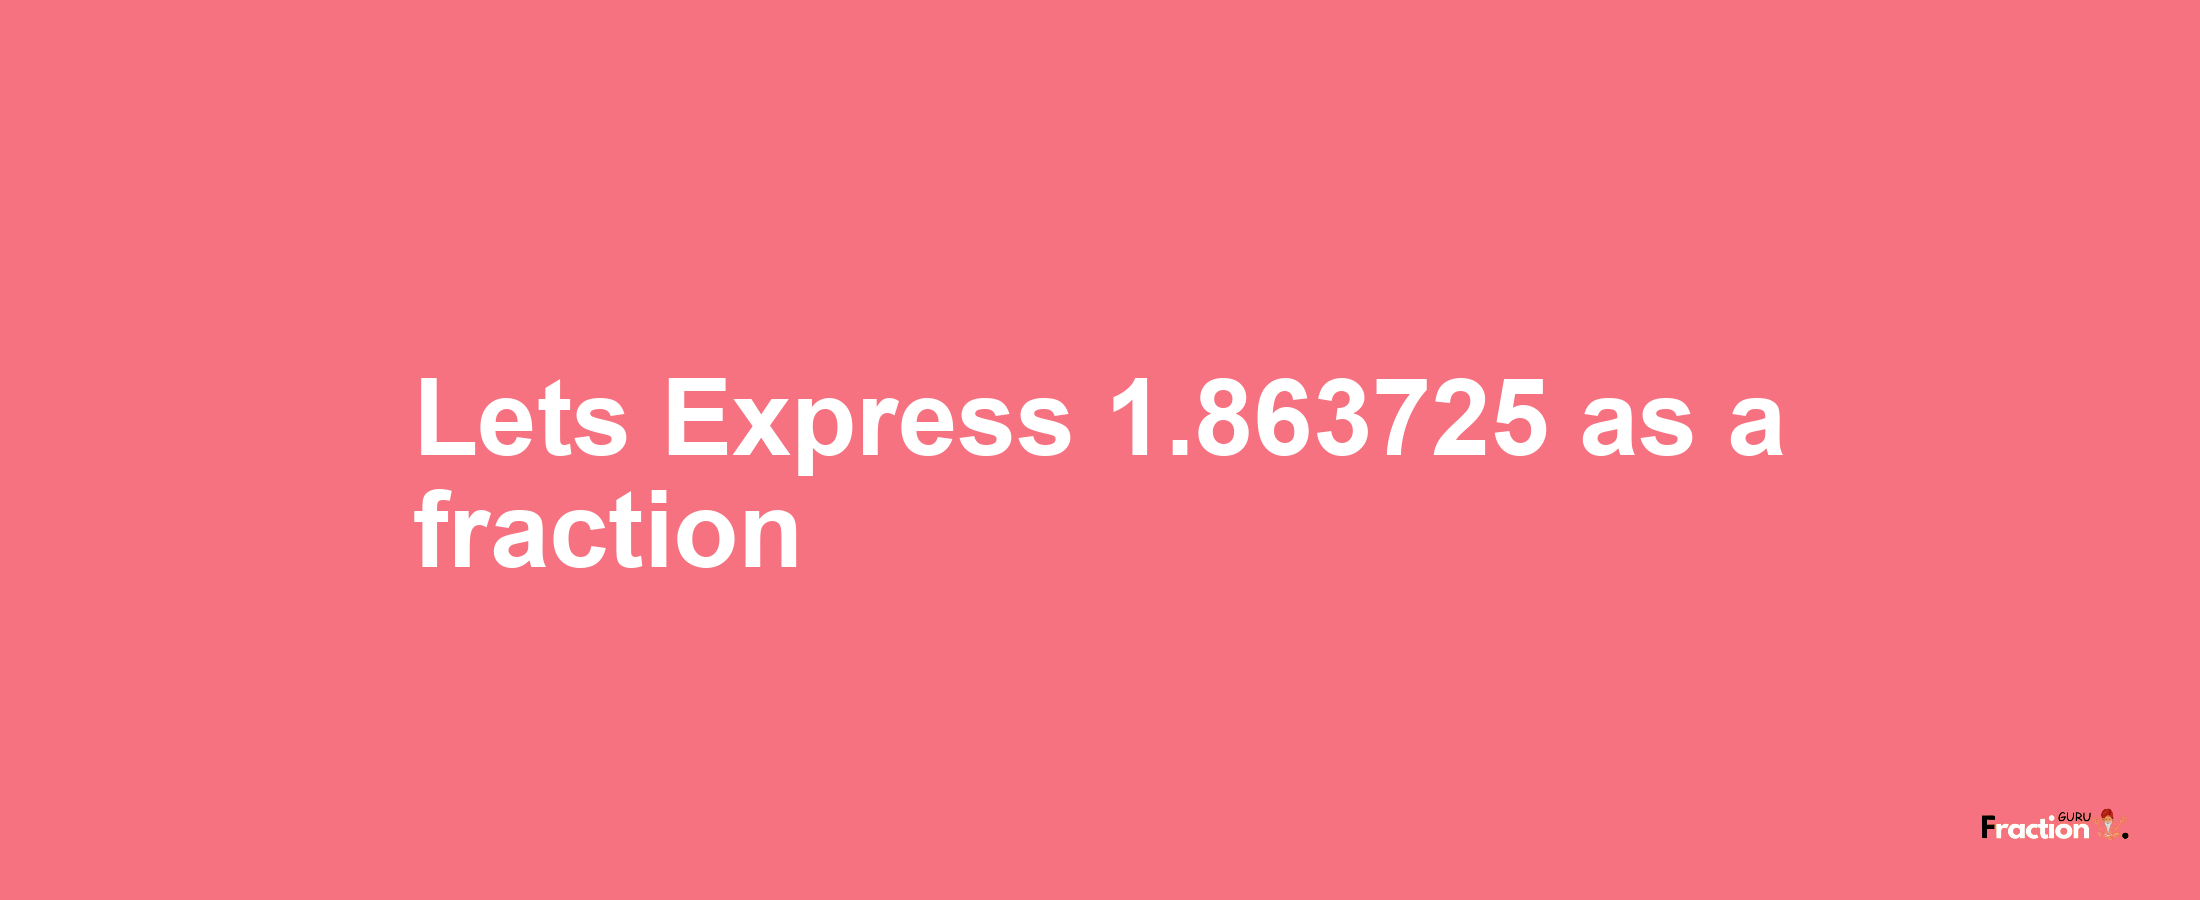 Lets Express 1.863725 as afraction